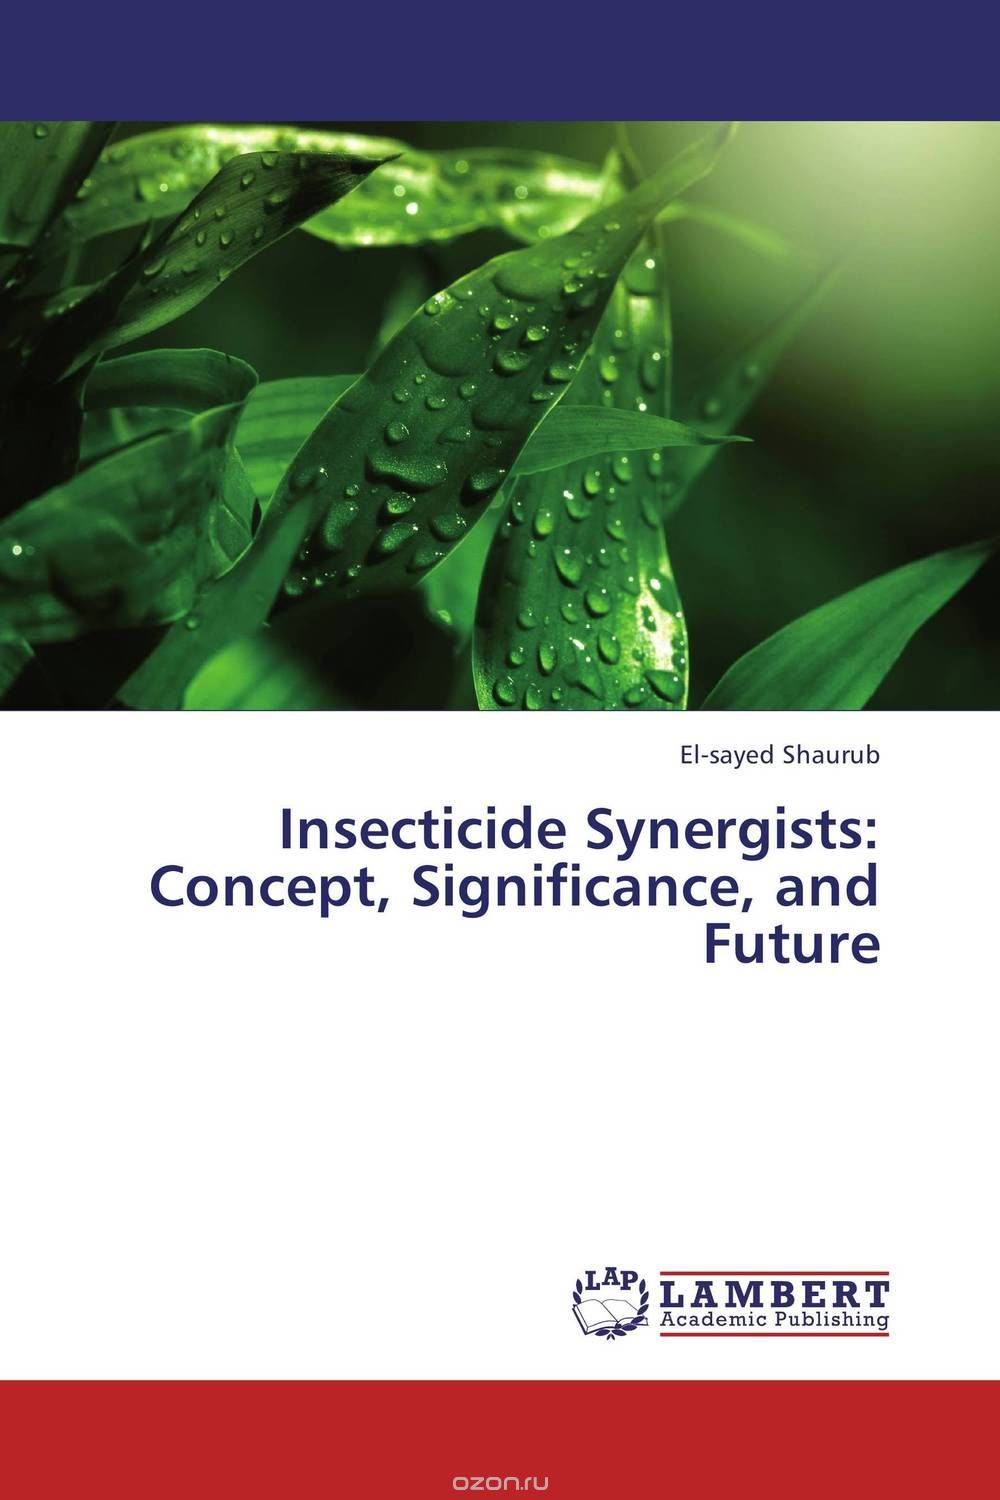 Insecticide Synergists: Concept, Significance, and Future